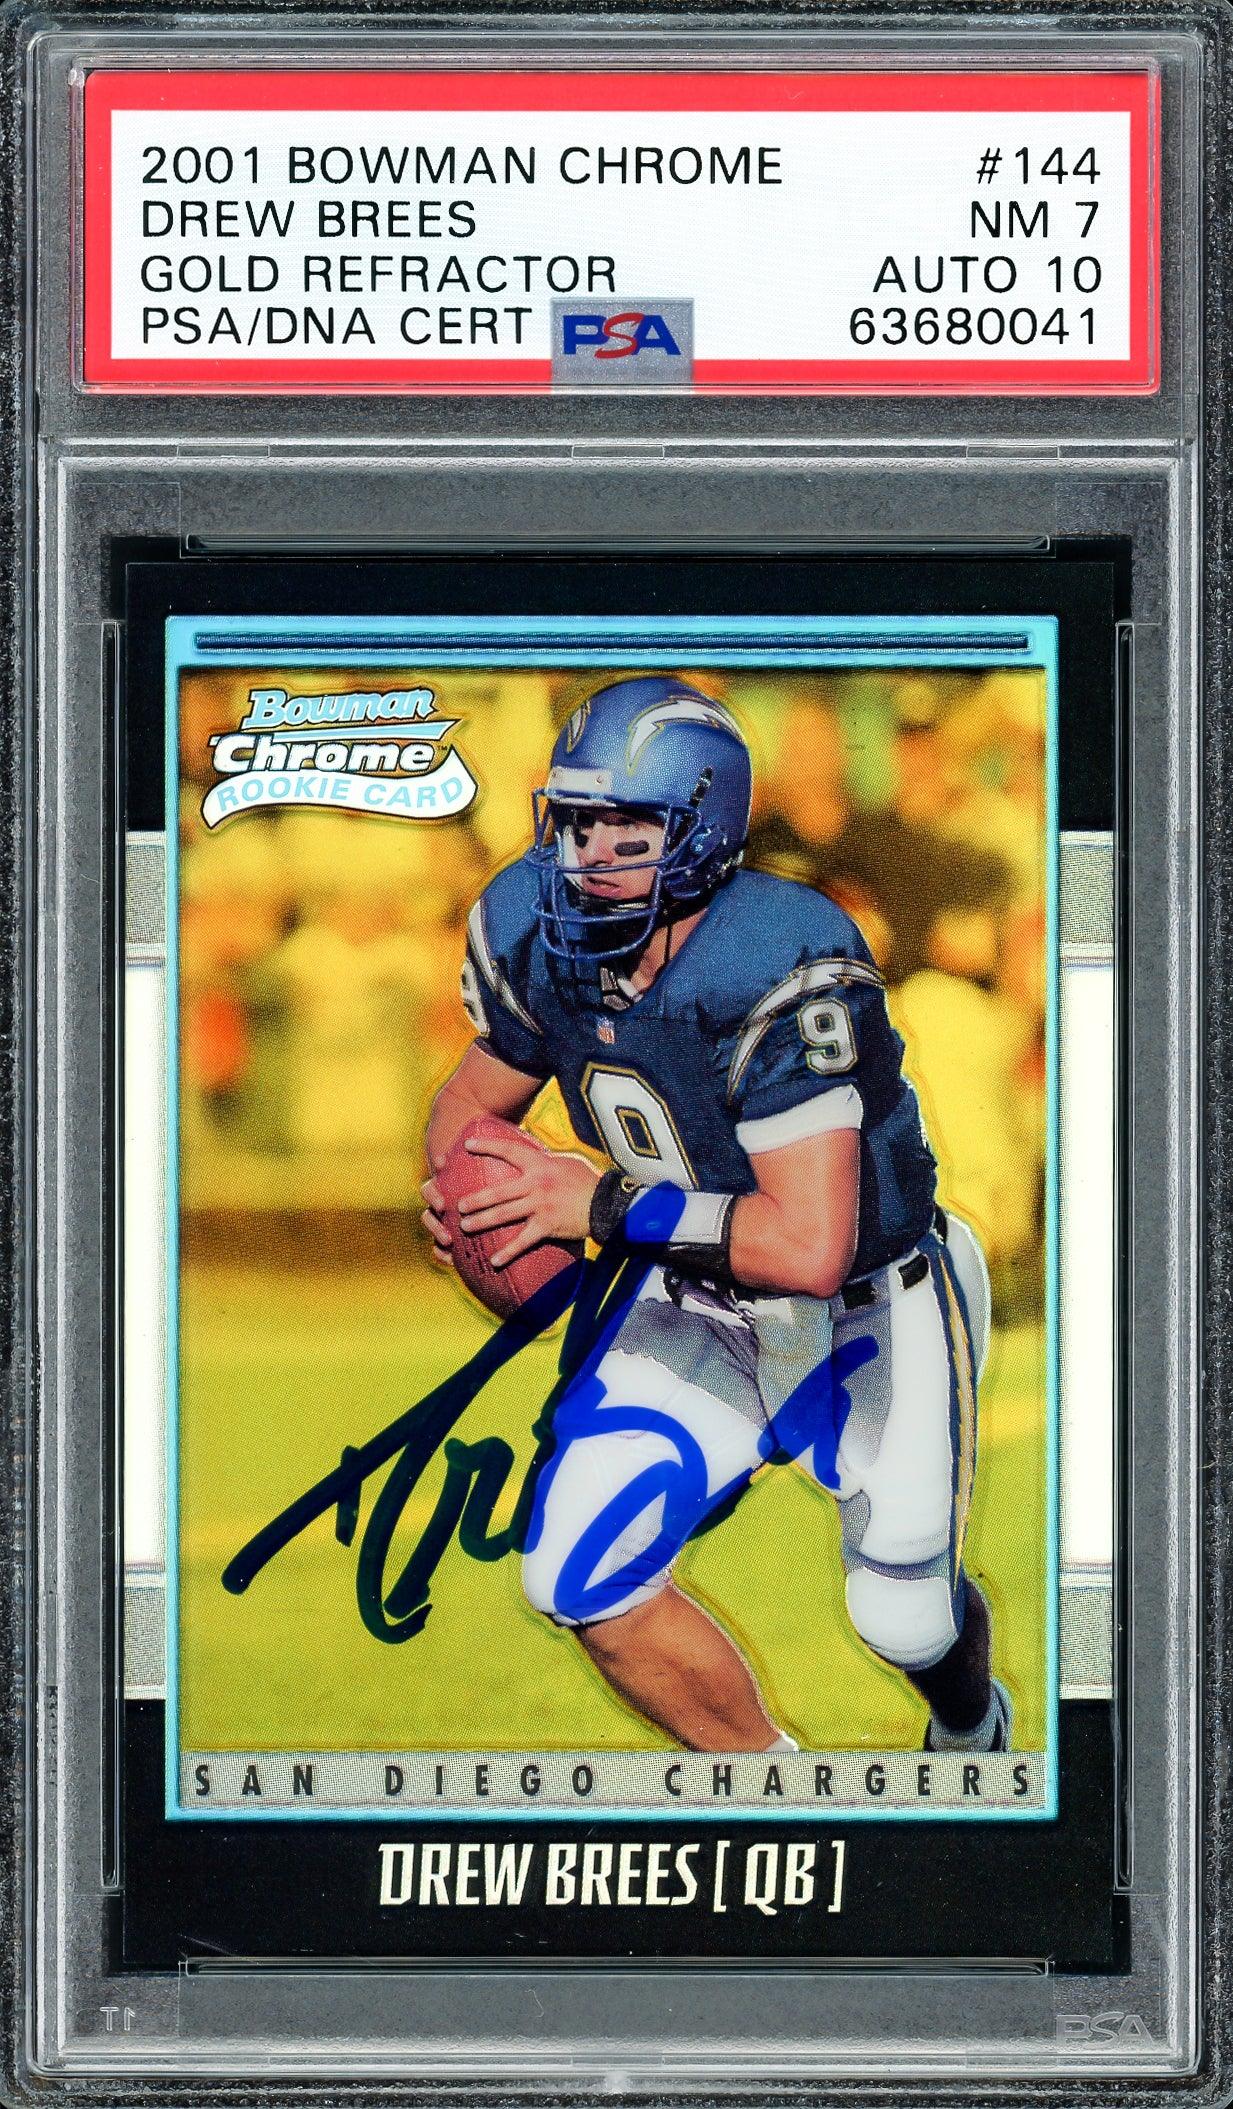 Drew Brees Autographed 2001 Bowman Chrome Gold Refractor Rookie